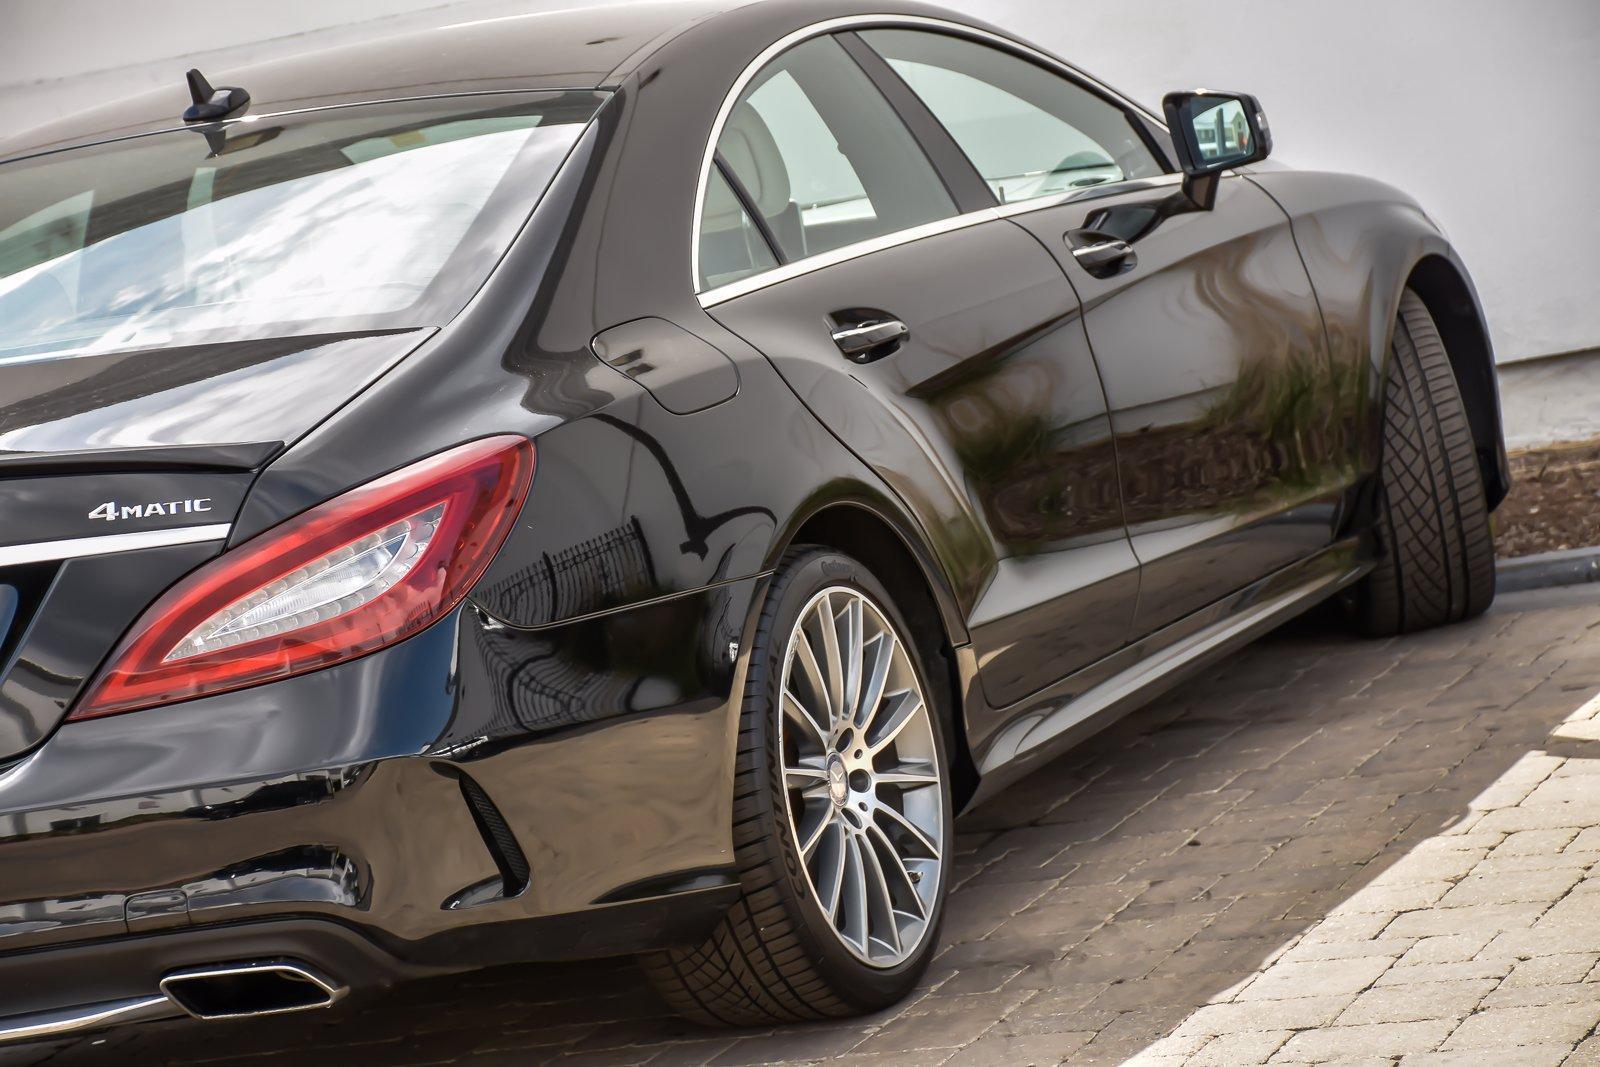 Used 2015 Mercedes-Benz CLS 550 | Downers Grove, IL